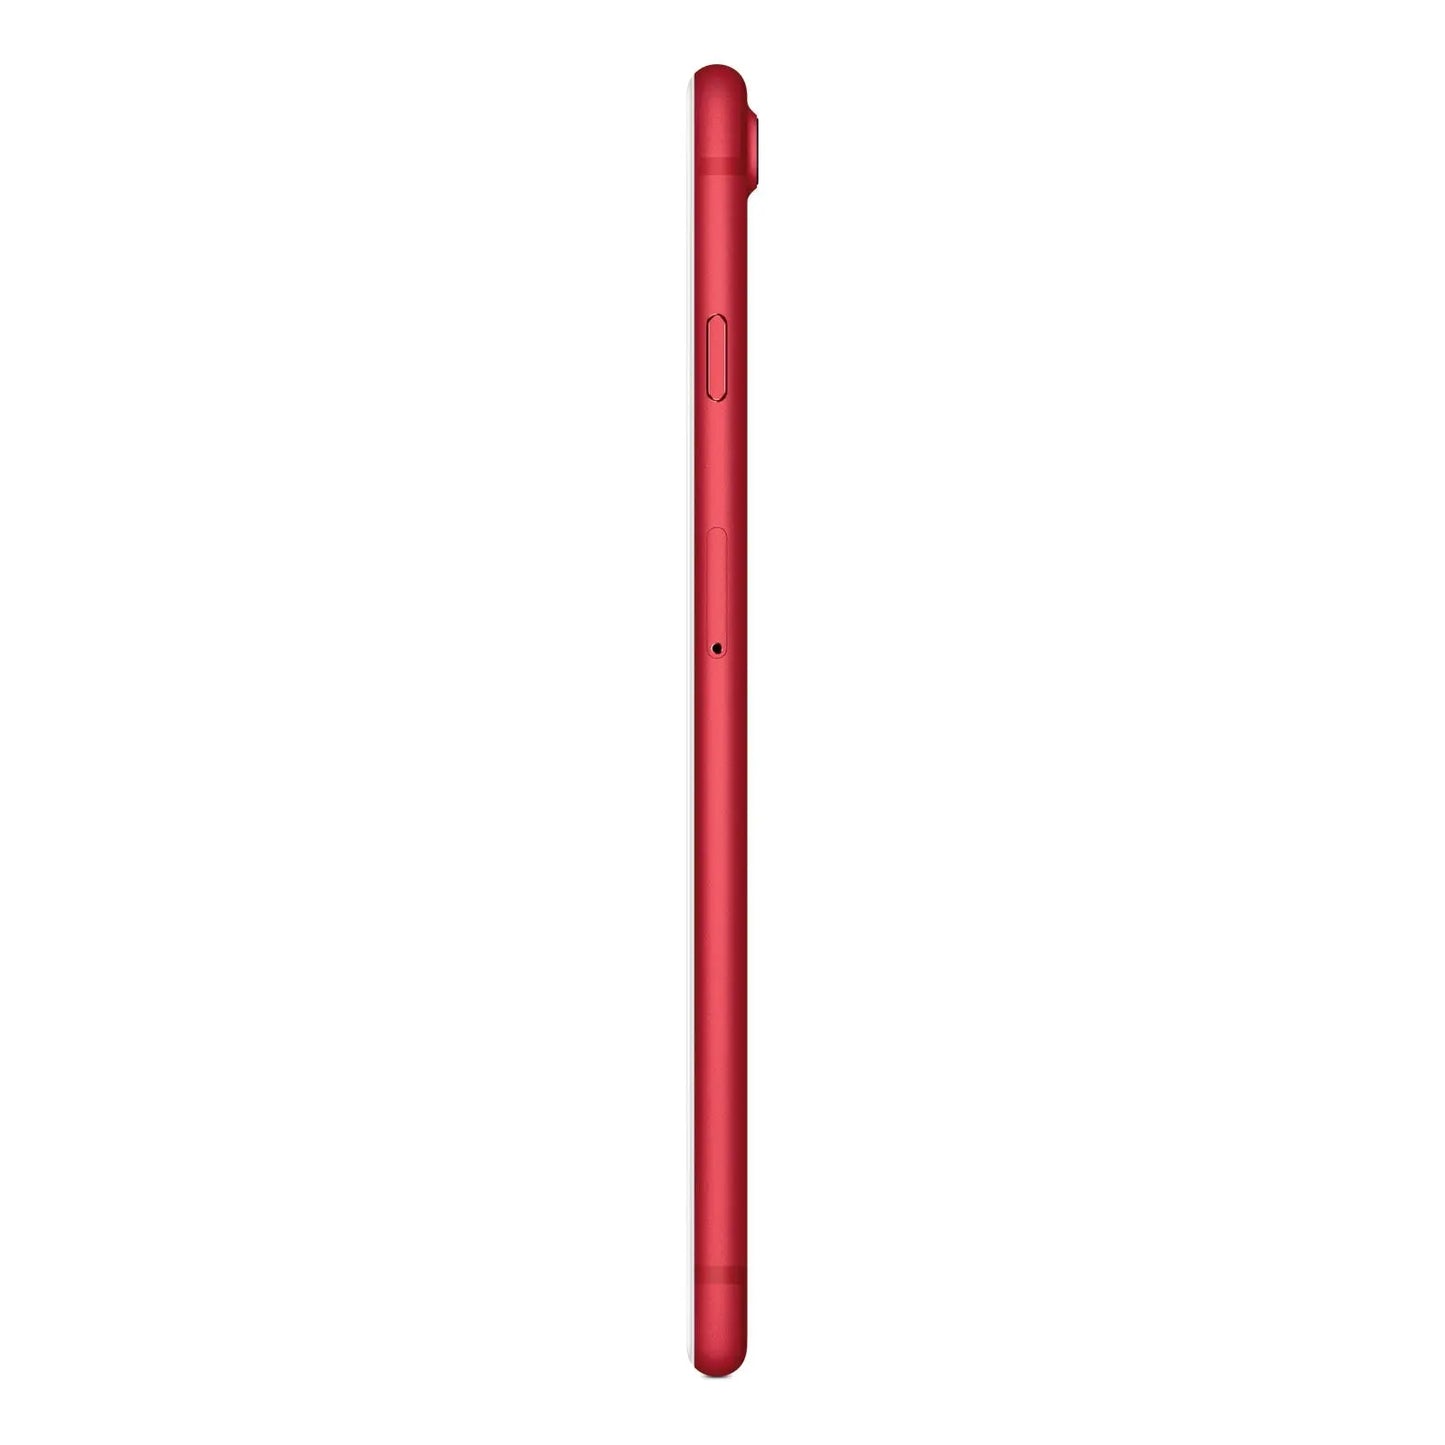 Smartphone Apple iPhone 7 Plus (PRODUCT) RED ROUGE 256 GO 0190198360847 Apple Computer, Inc